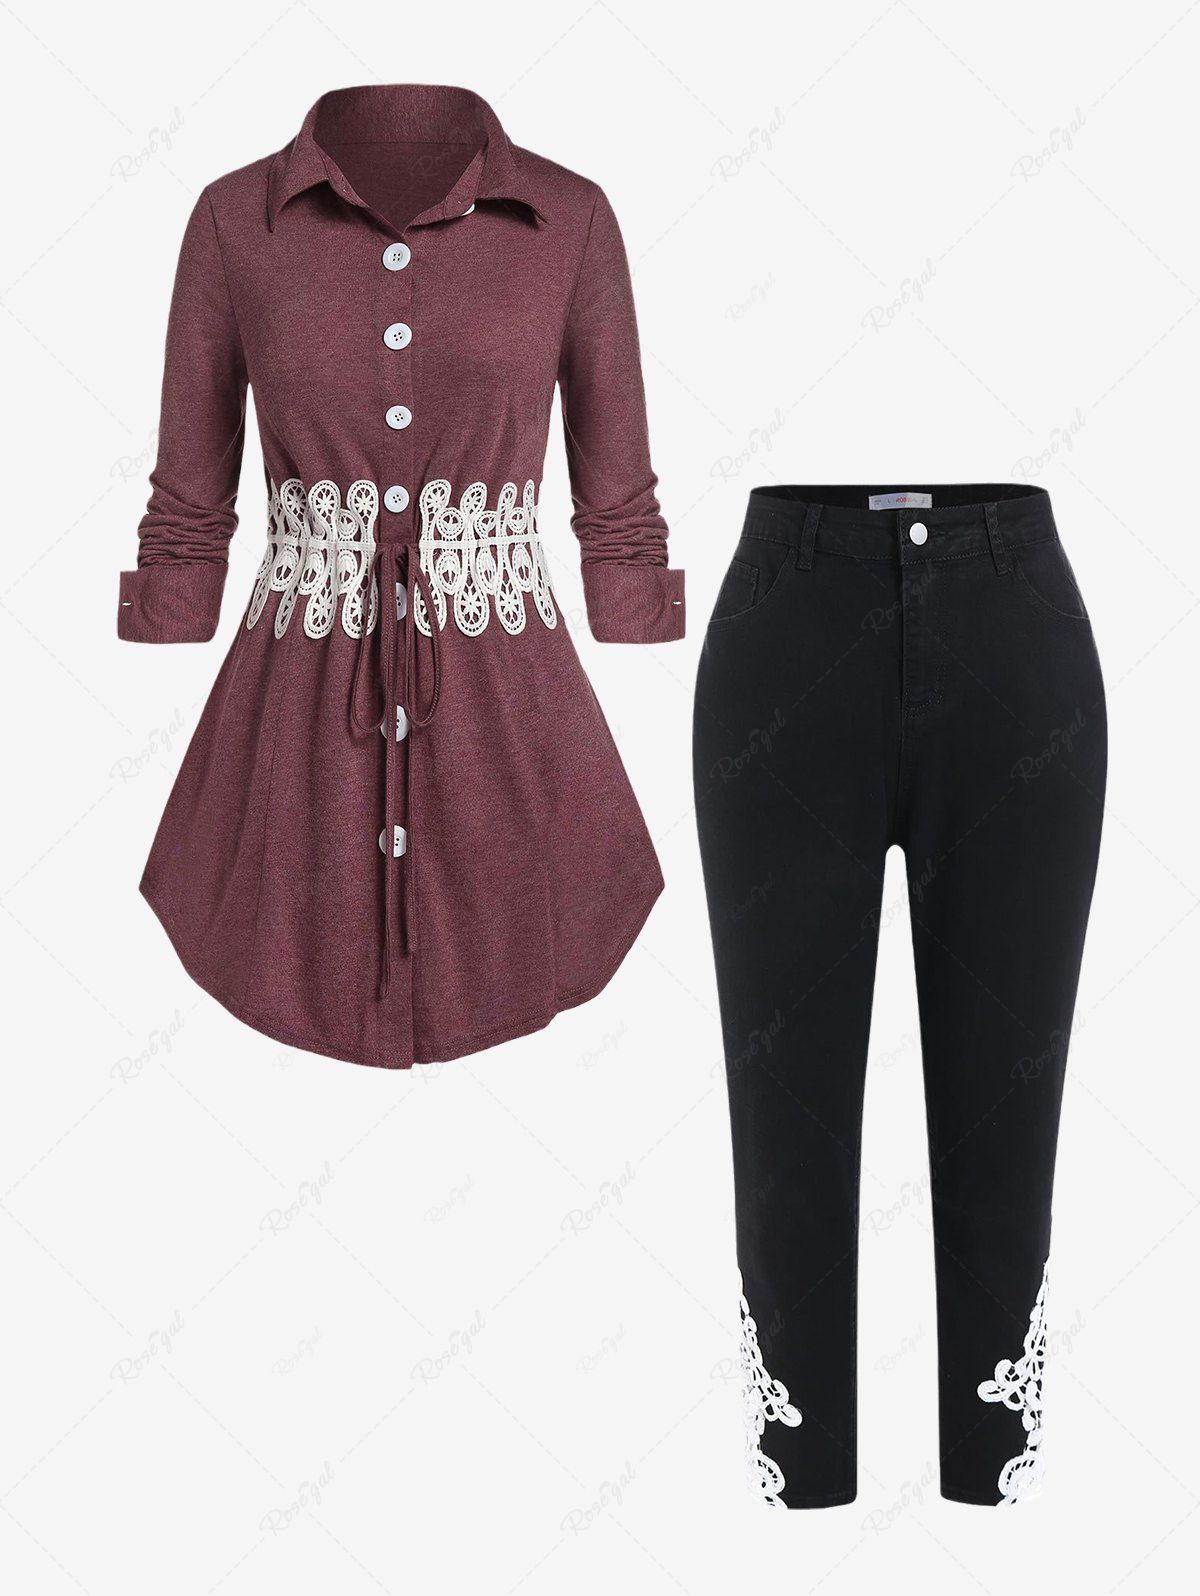 Discount Contrast Lace Button Up Drawstring Shirt and High Waisted Jeans Plus Size Outfit  